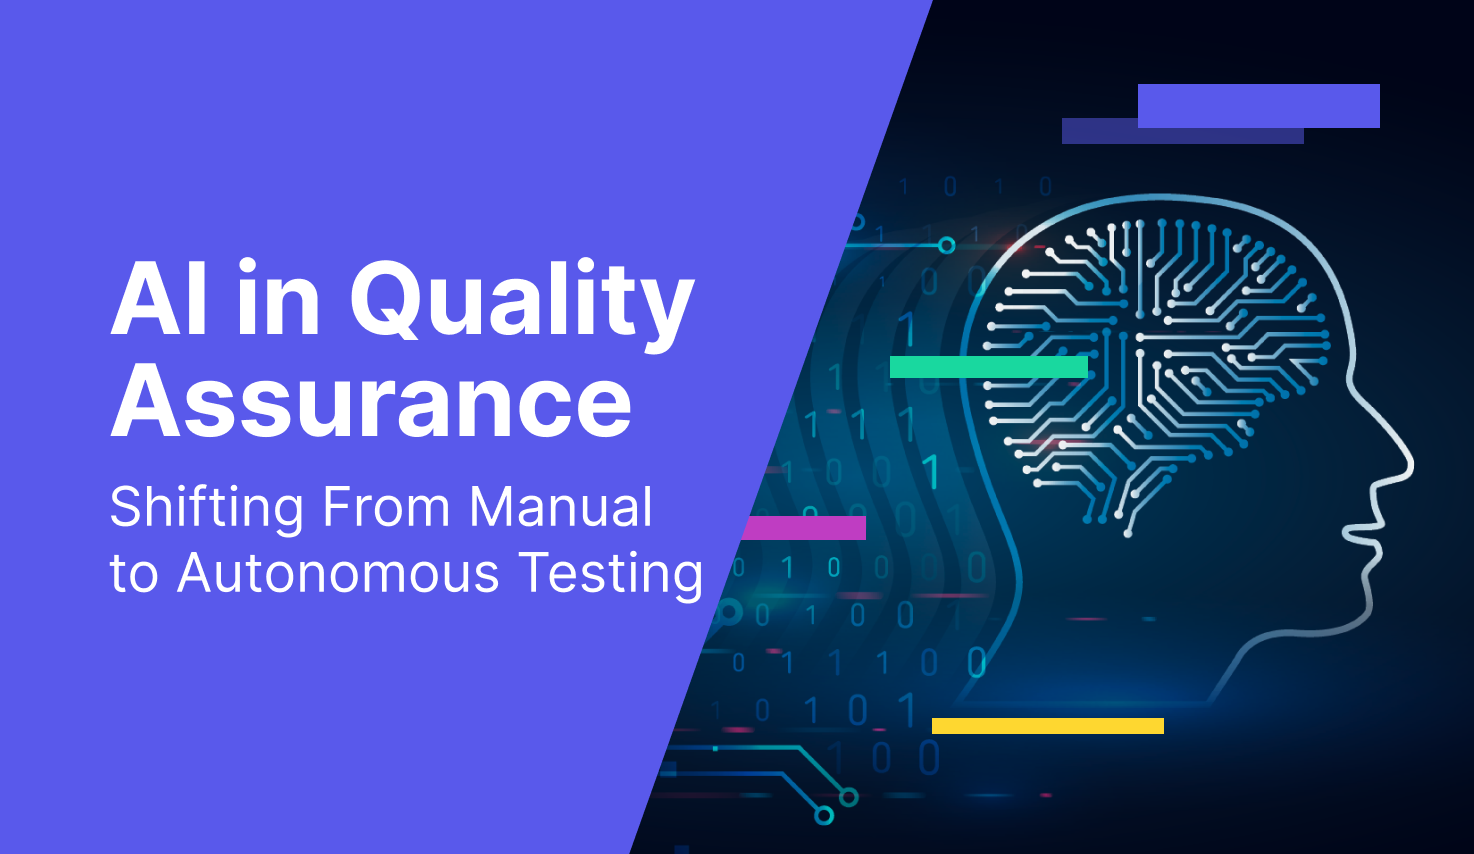 AI in quality assurance to transition from manual testing to automation testing